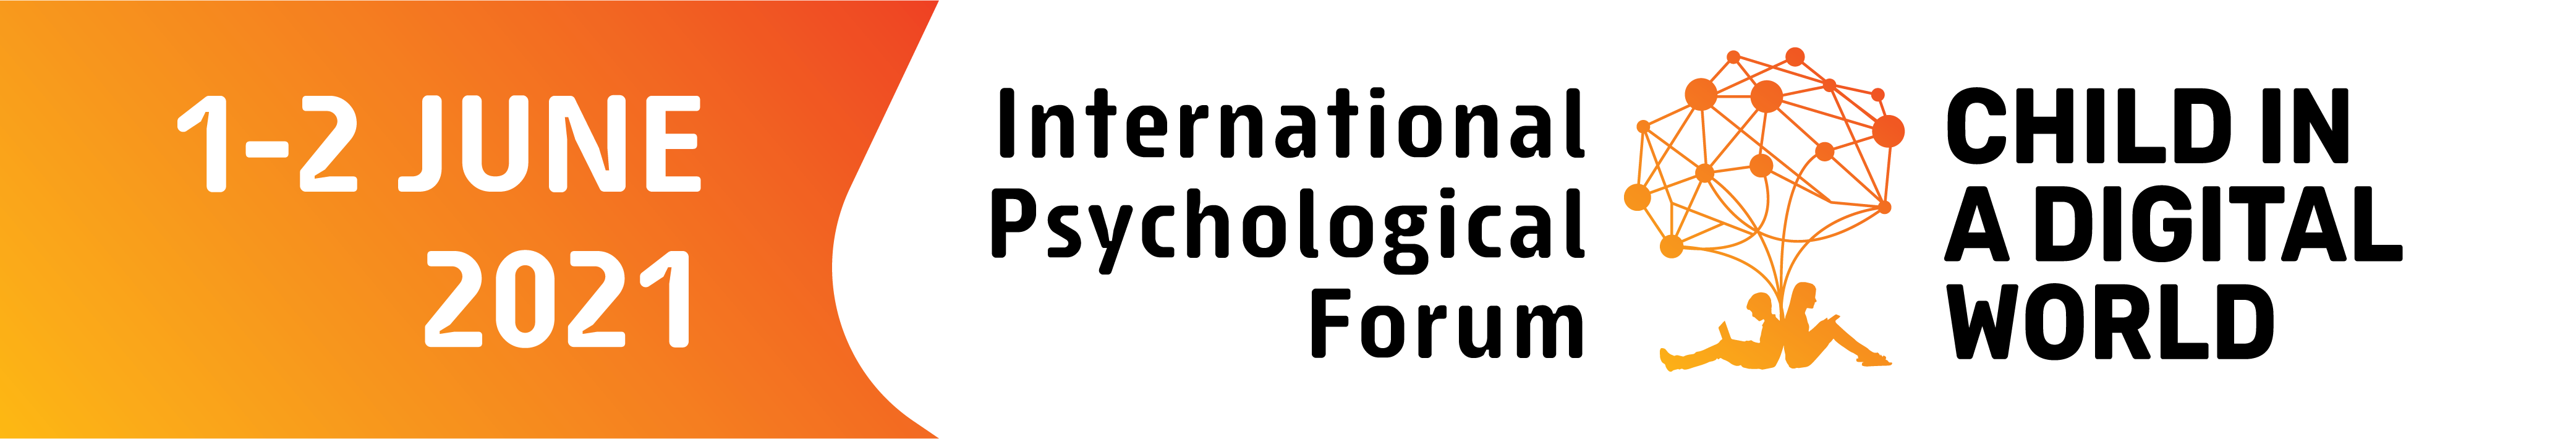 The banner to welcome you to The International Psychological Forum - Child in the Digital World